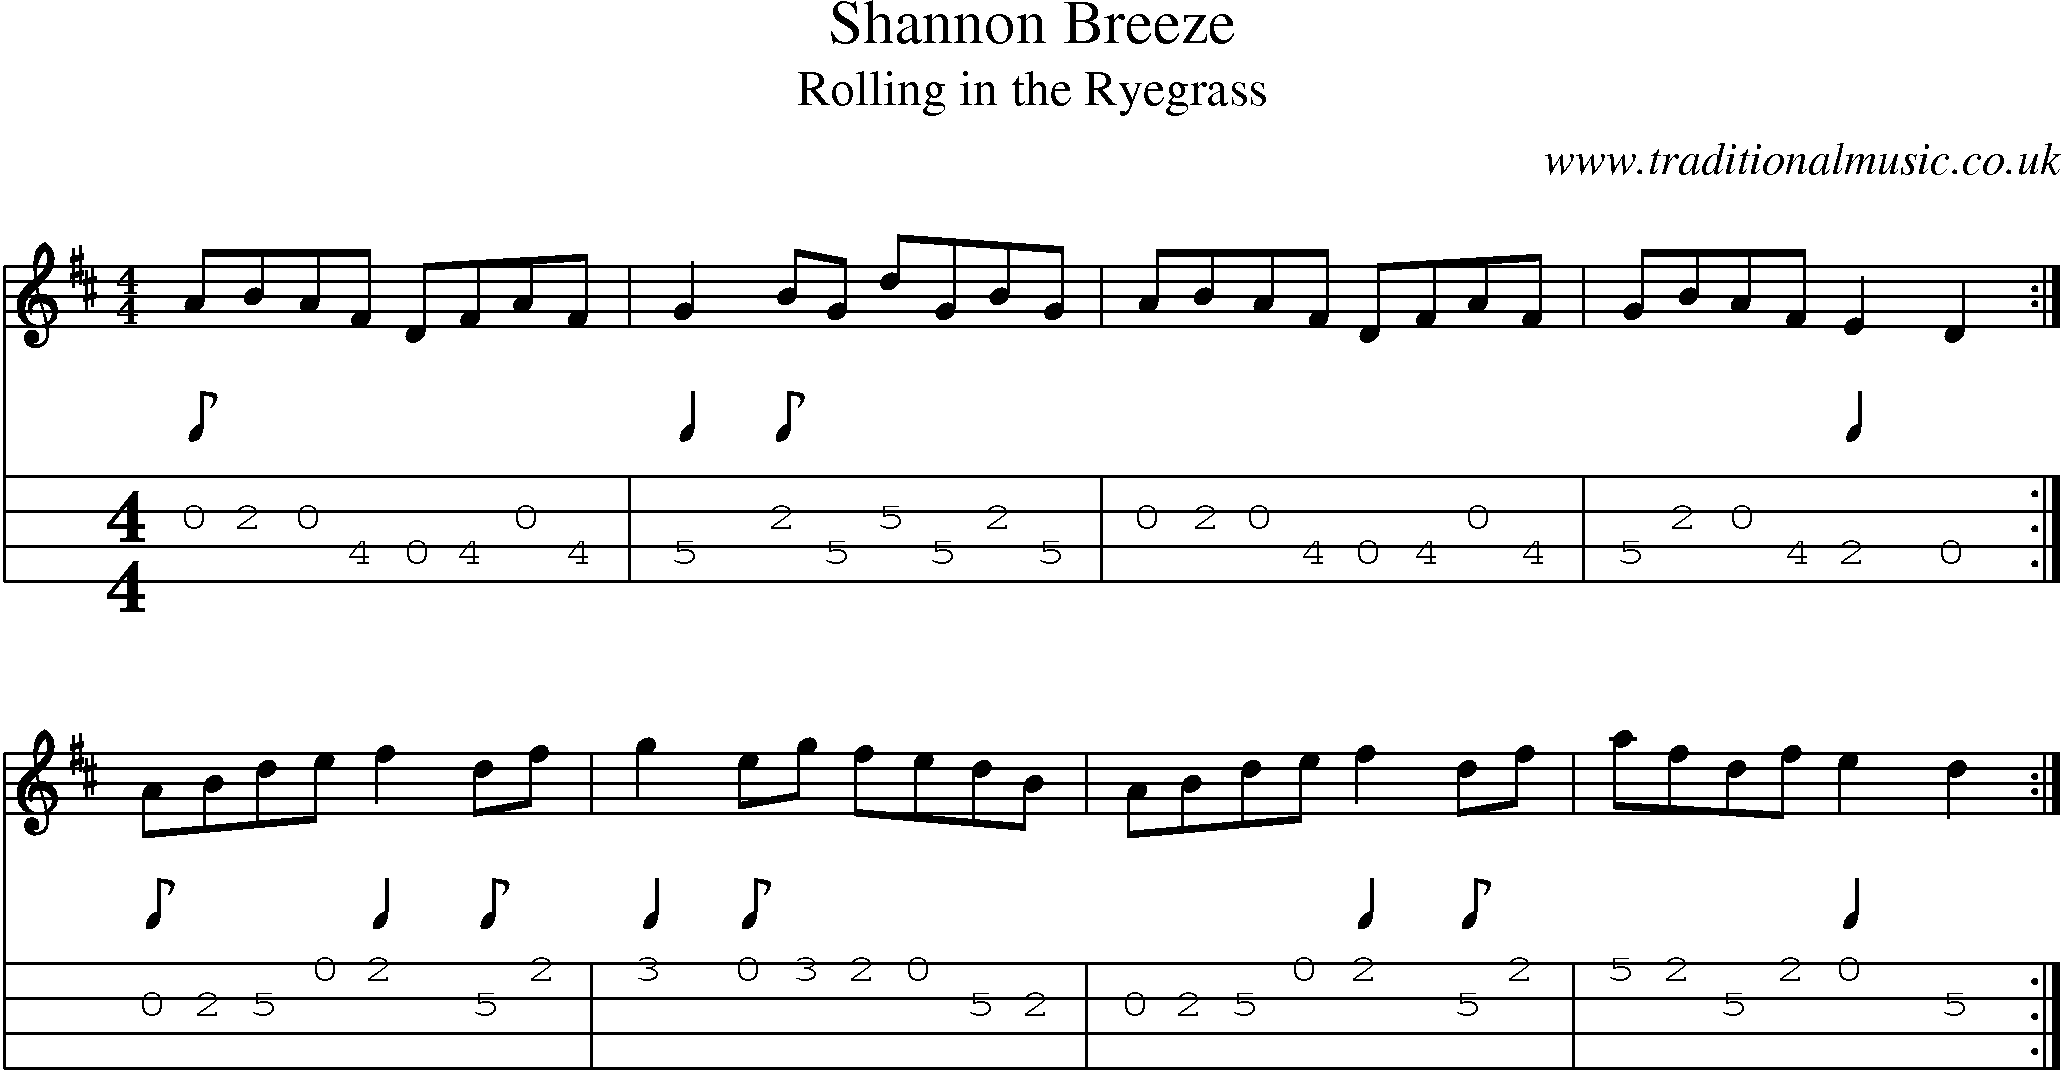 Music Score and Mandolin Tabs for Shannon Breeze